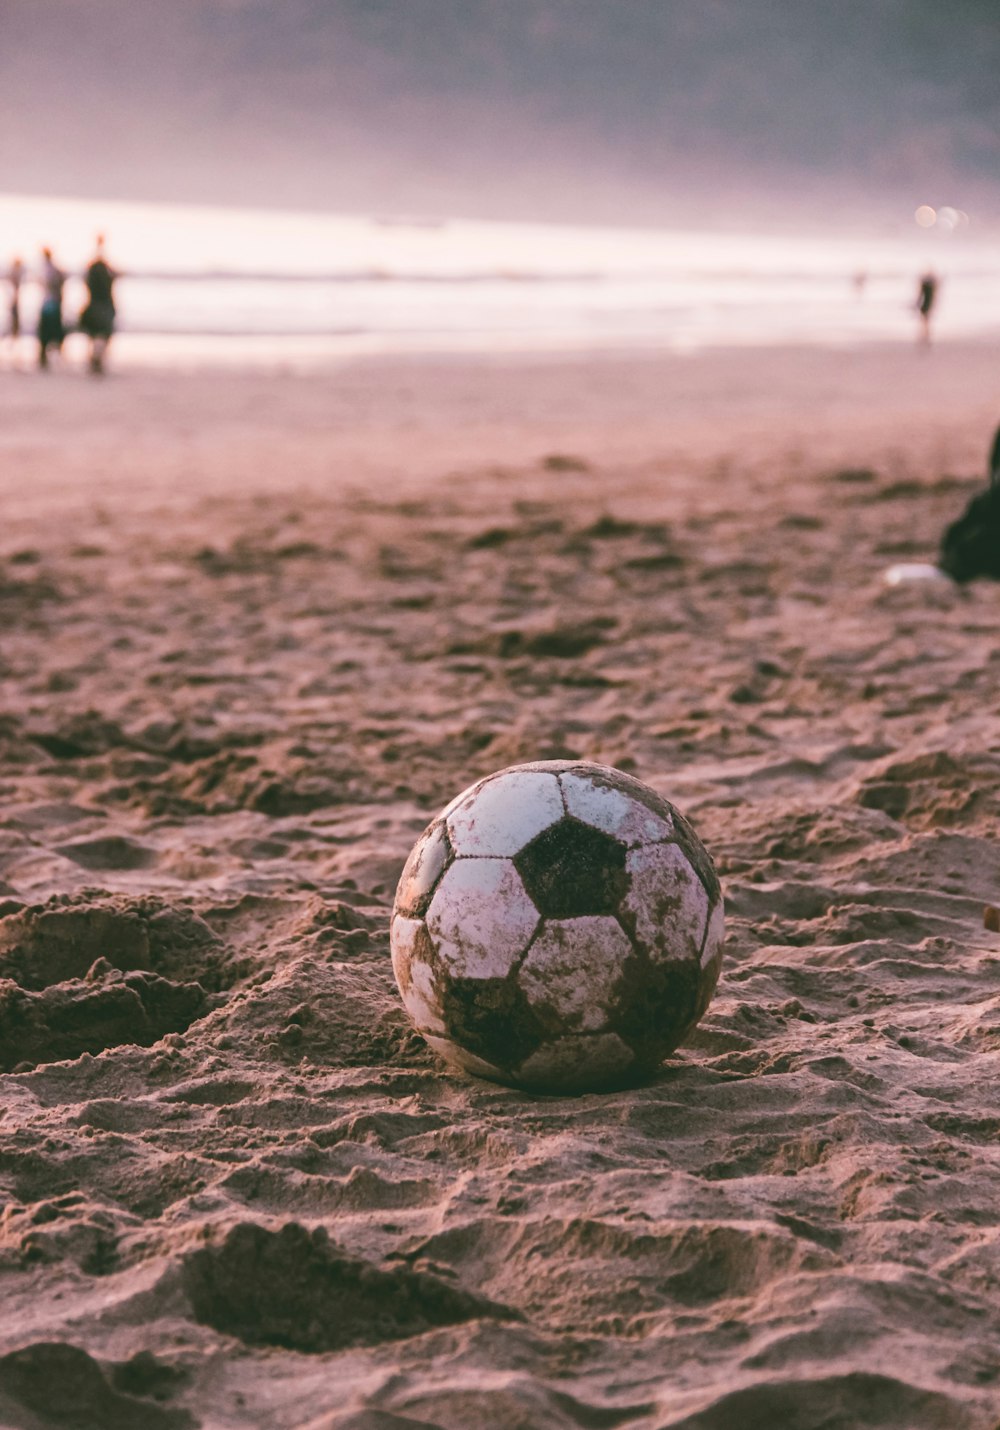 black and white soccer ball on brown sand